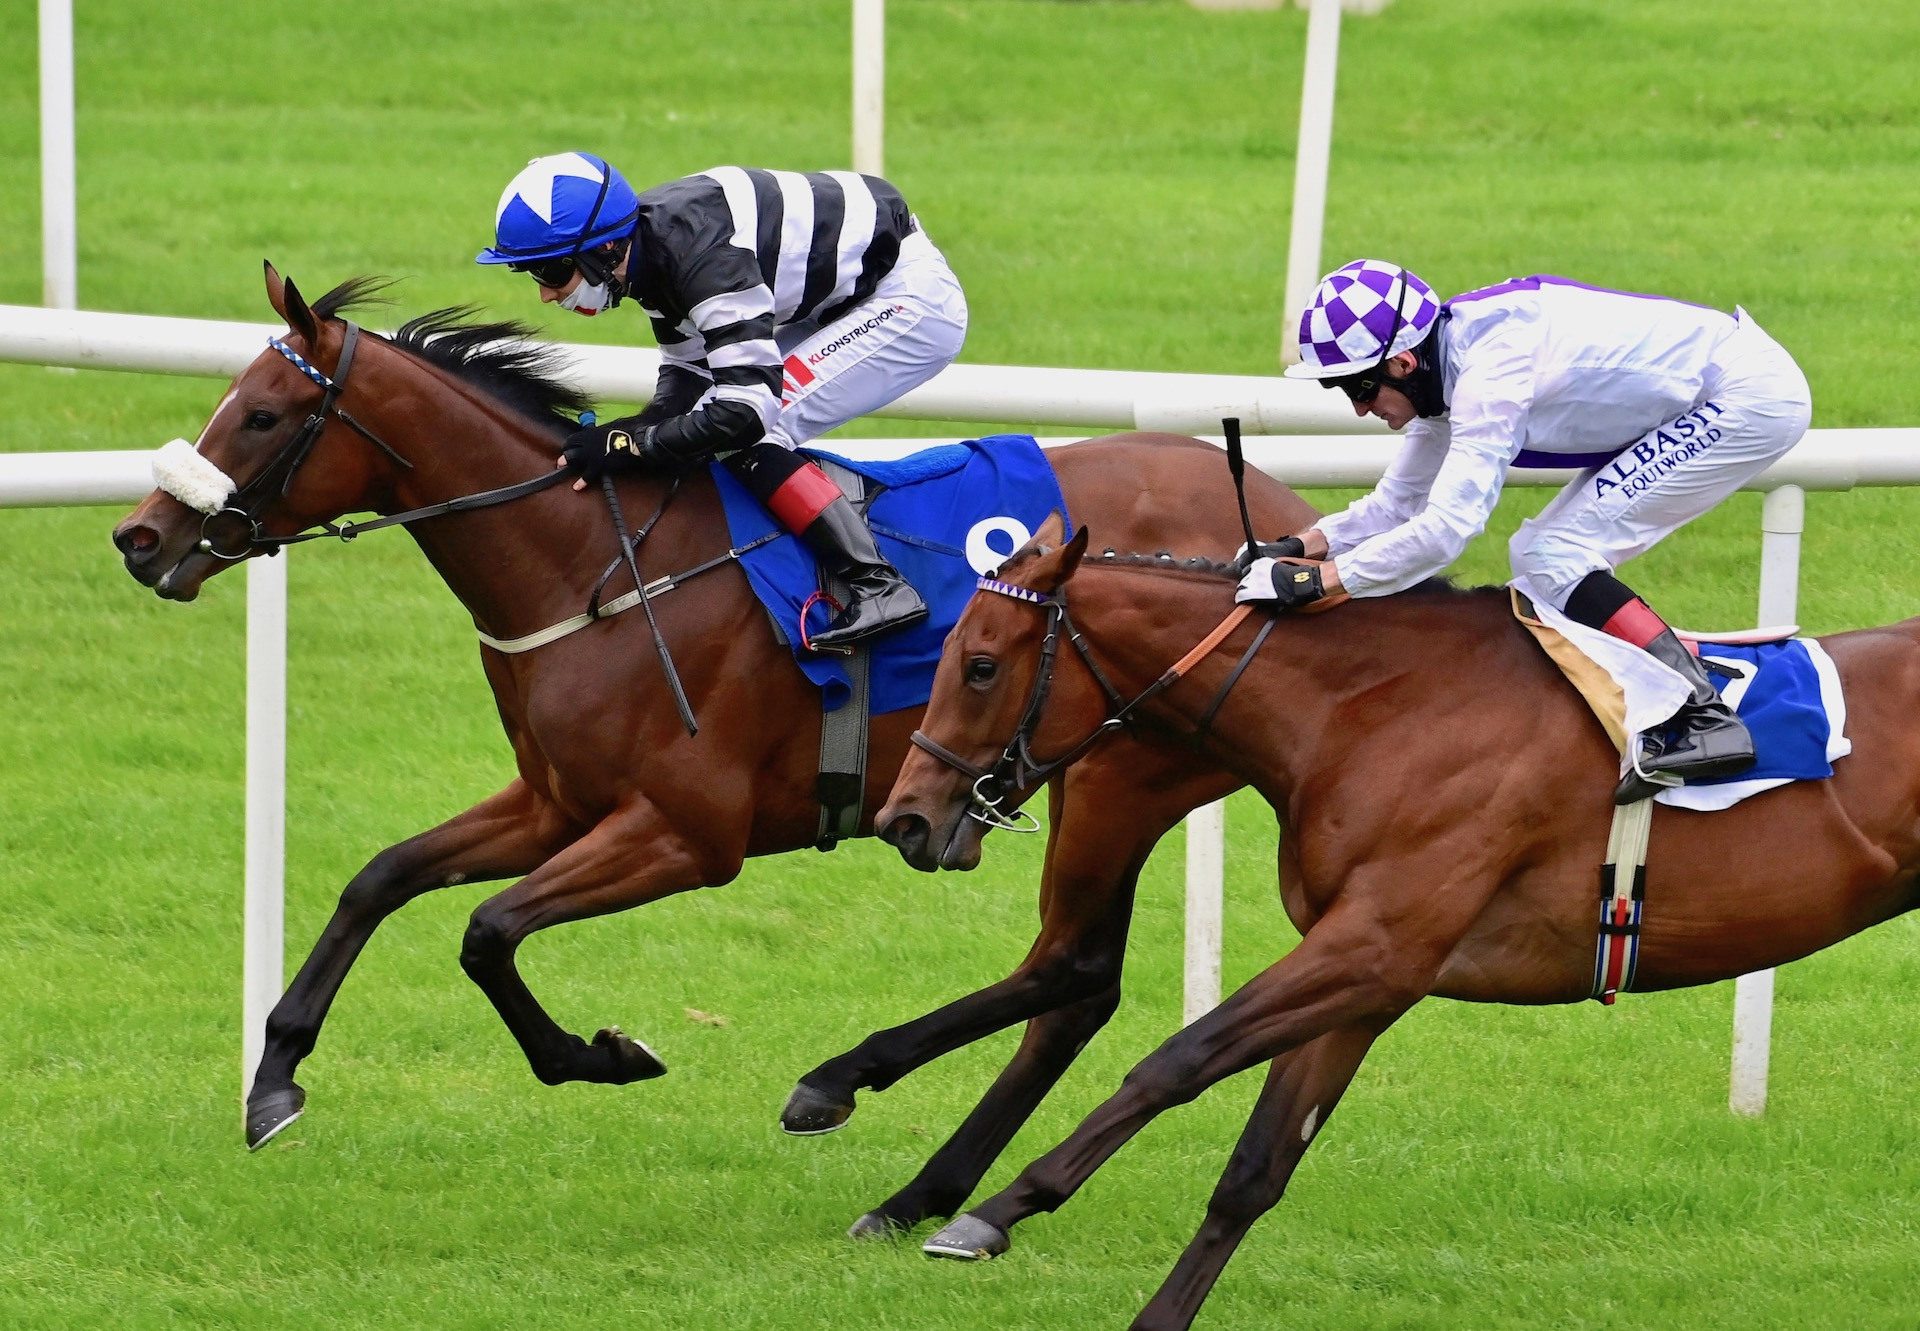 Malayan (The Gurkha) Records Her Second Win At Roscommon